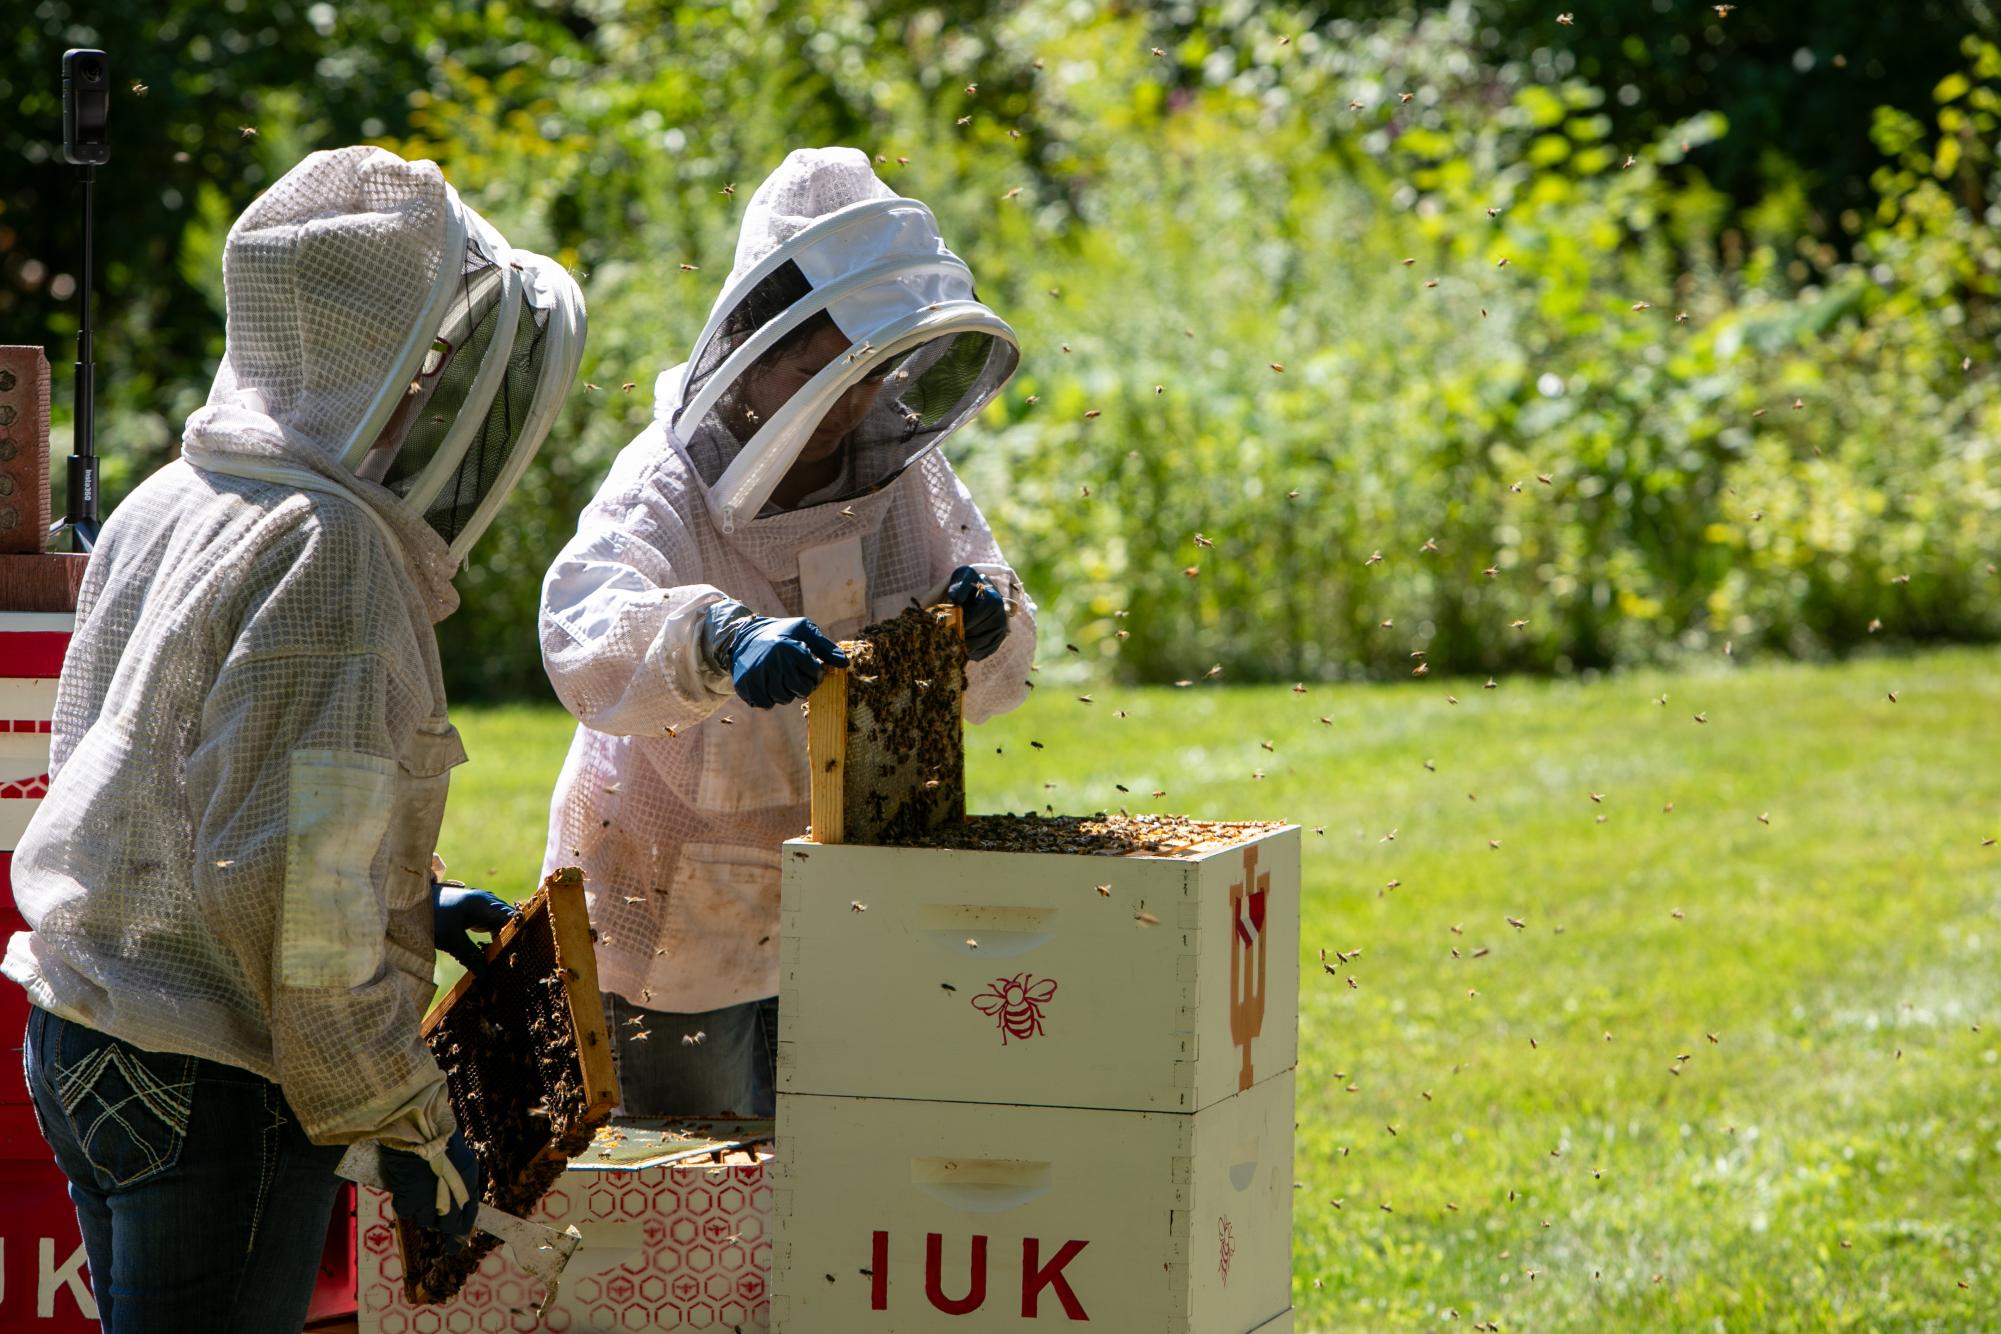 Local beekeeper shares her insight